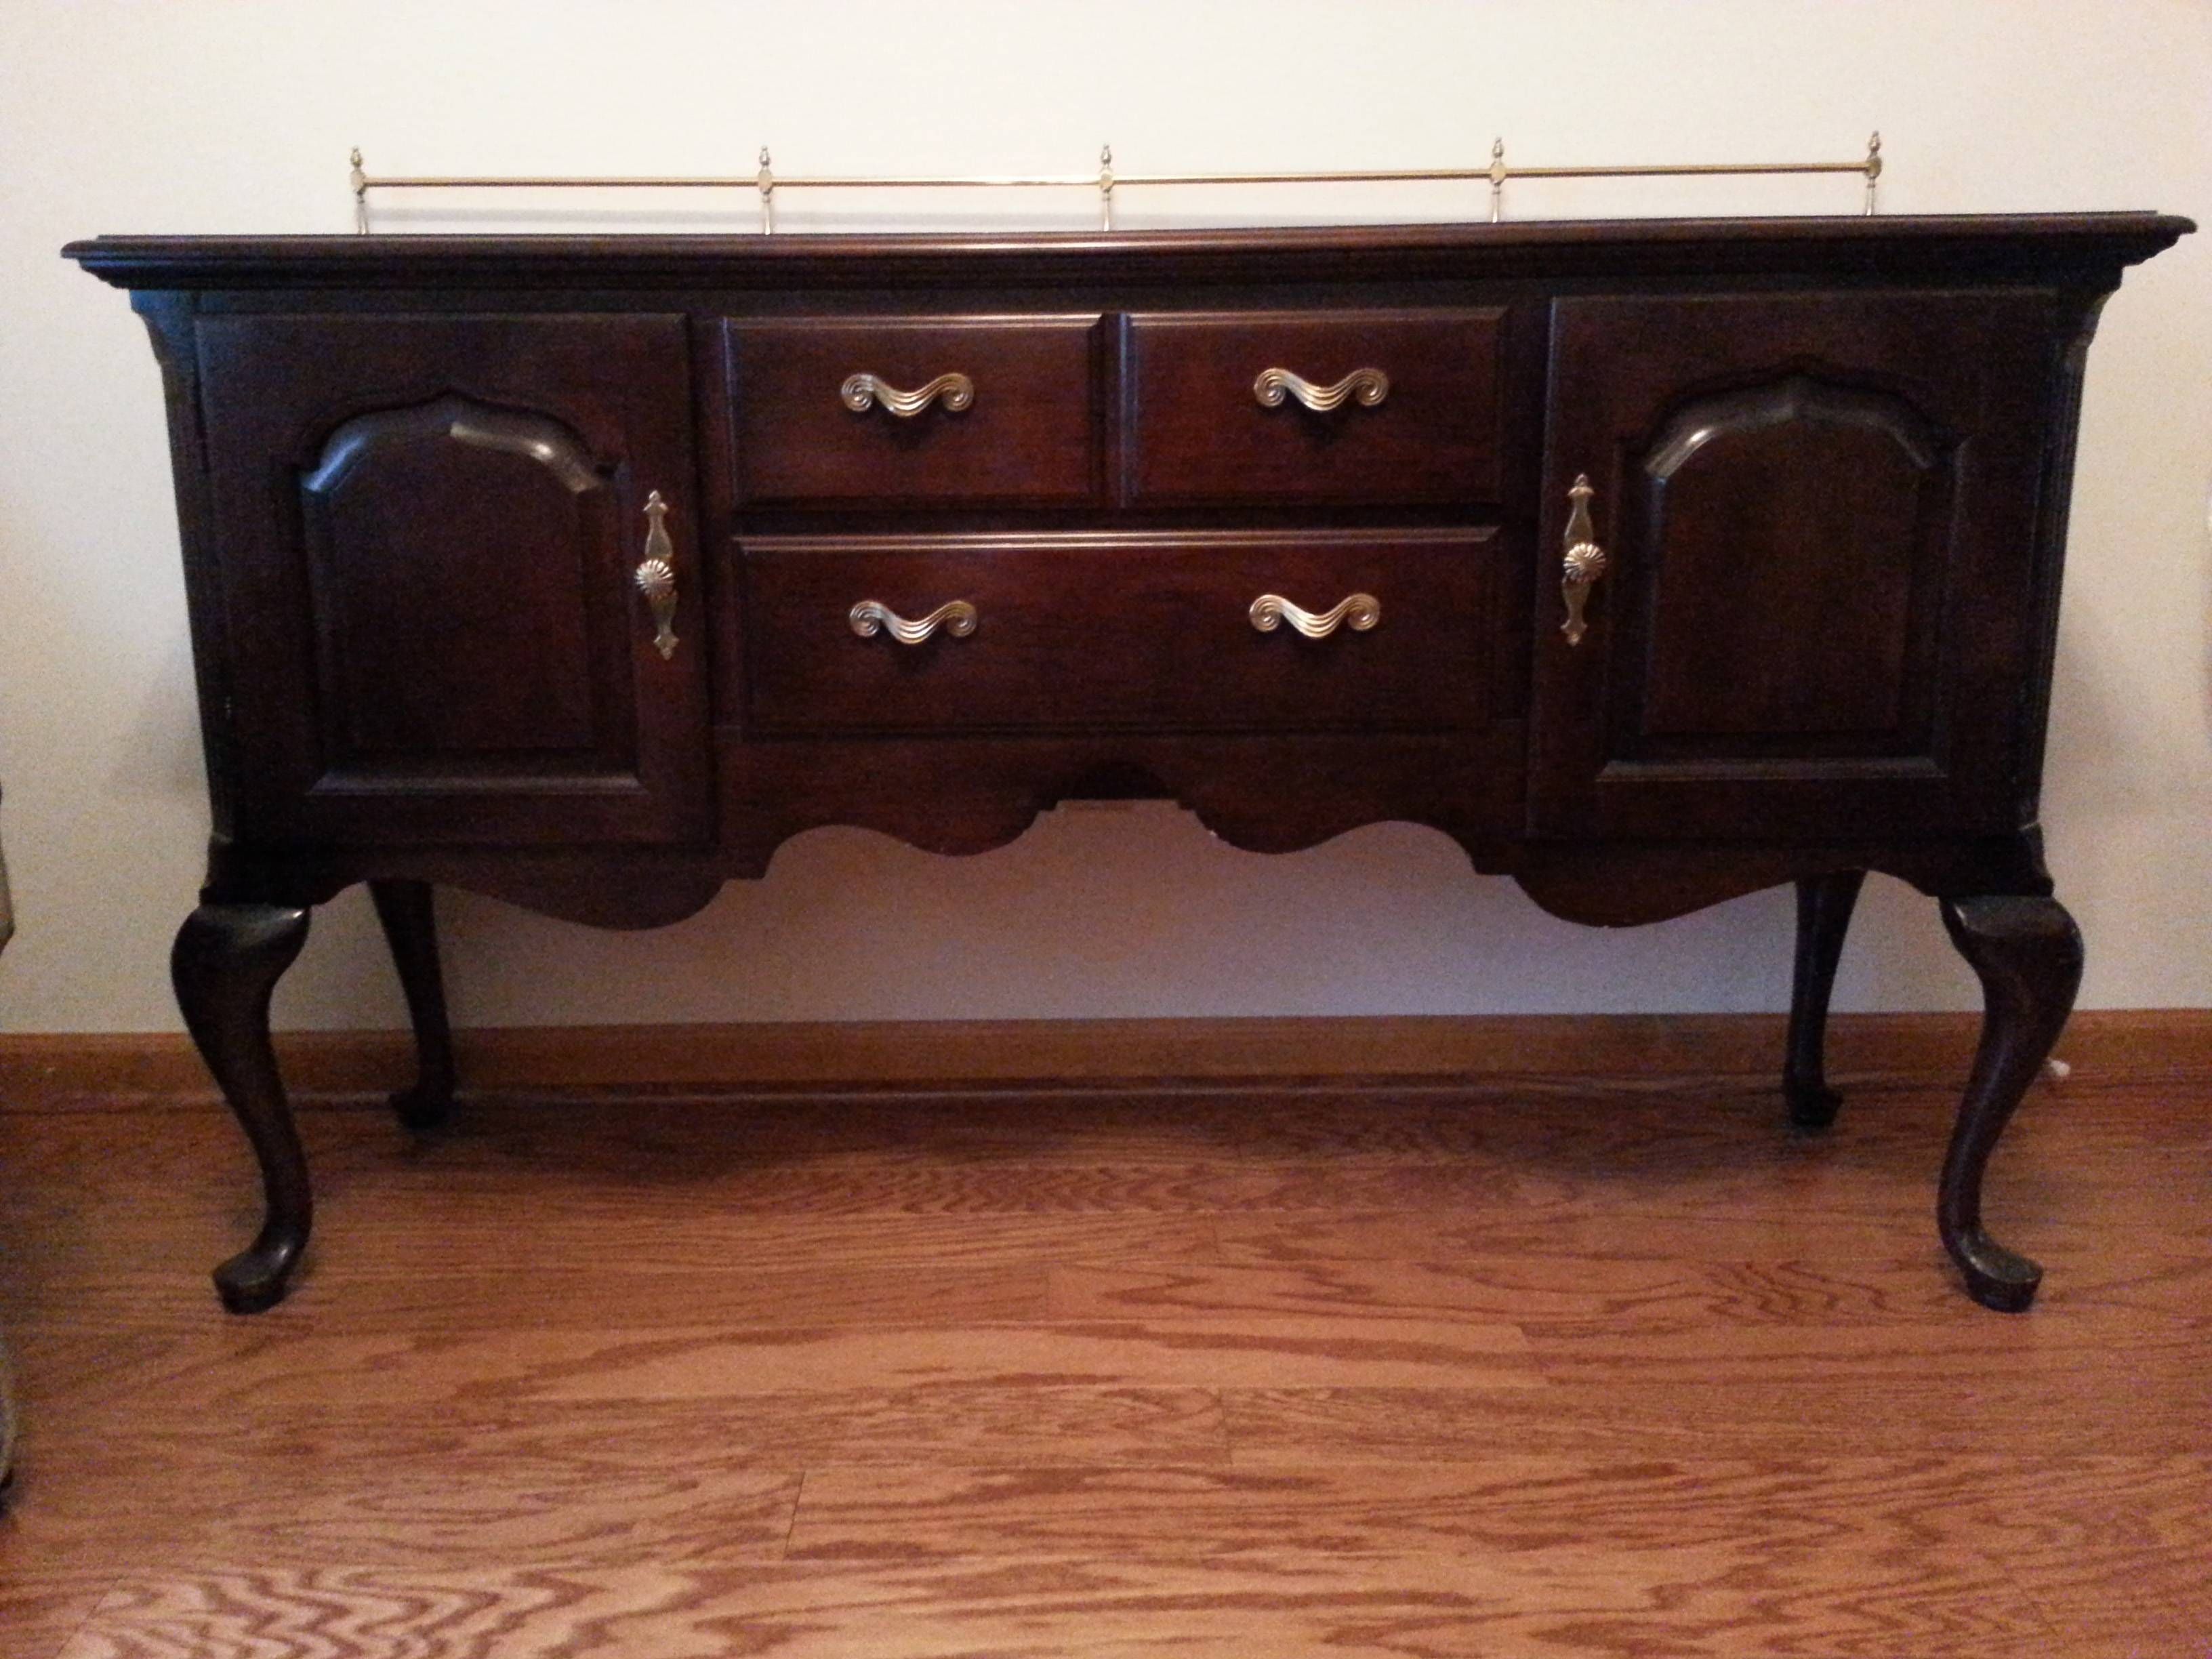 Furniture: Antique Dark Sideboard Buffet With Three Drawers On Throughout Newest Antique Buffet Sideboards (View 9 of 15)